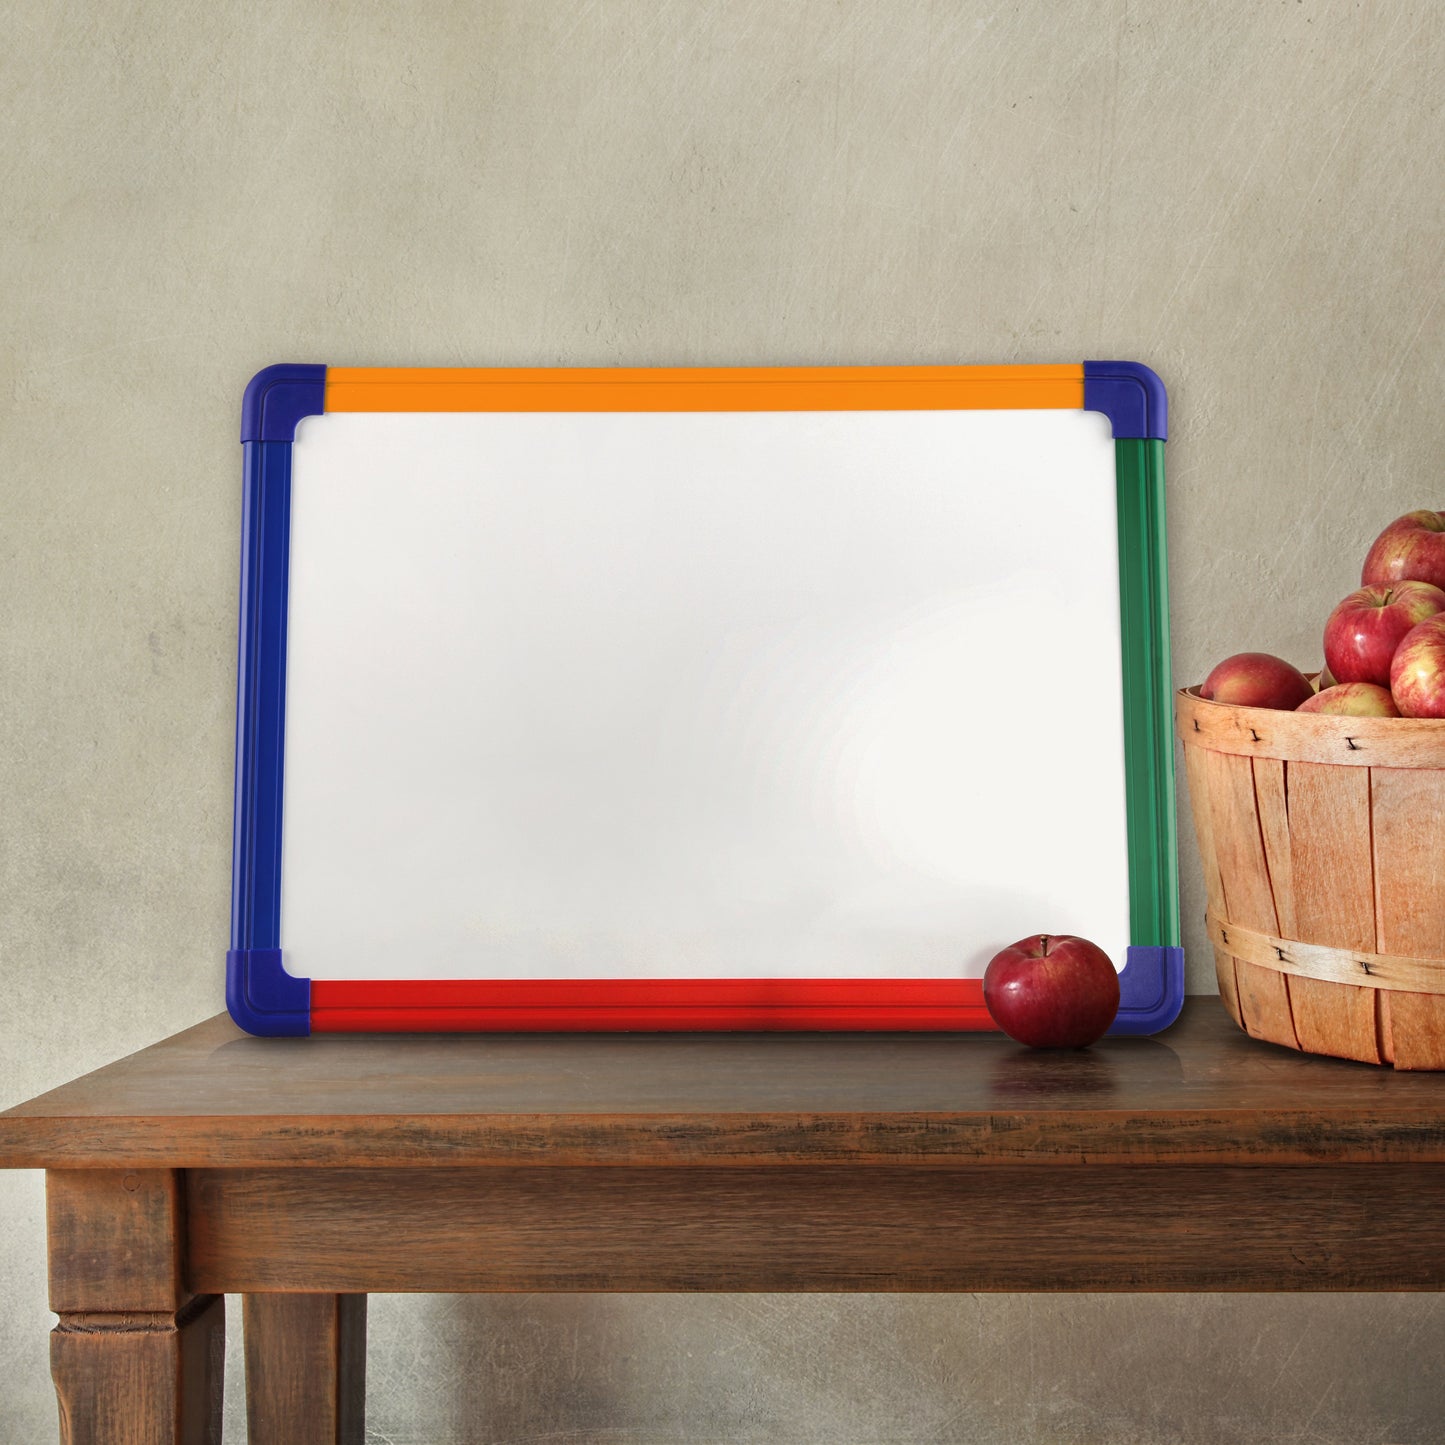 Colored Frame Magnetic Dry Erase White Board or Magnetic Dry Erase Writing Boards Small Dri Erase Drawing Boards - Premium dry erase lapboard from Madic Whiteboard - Madic Whiteboard